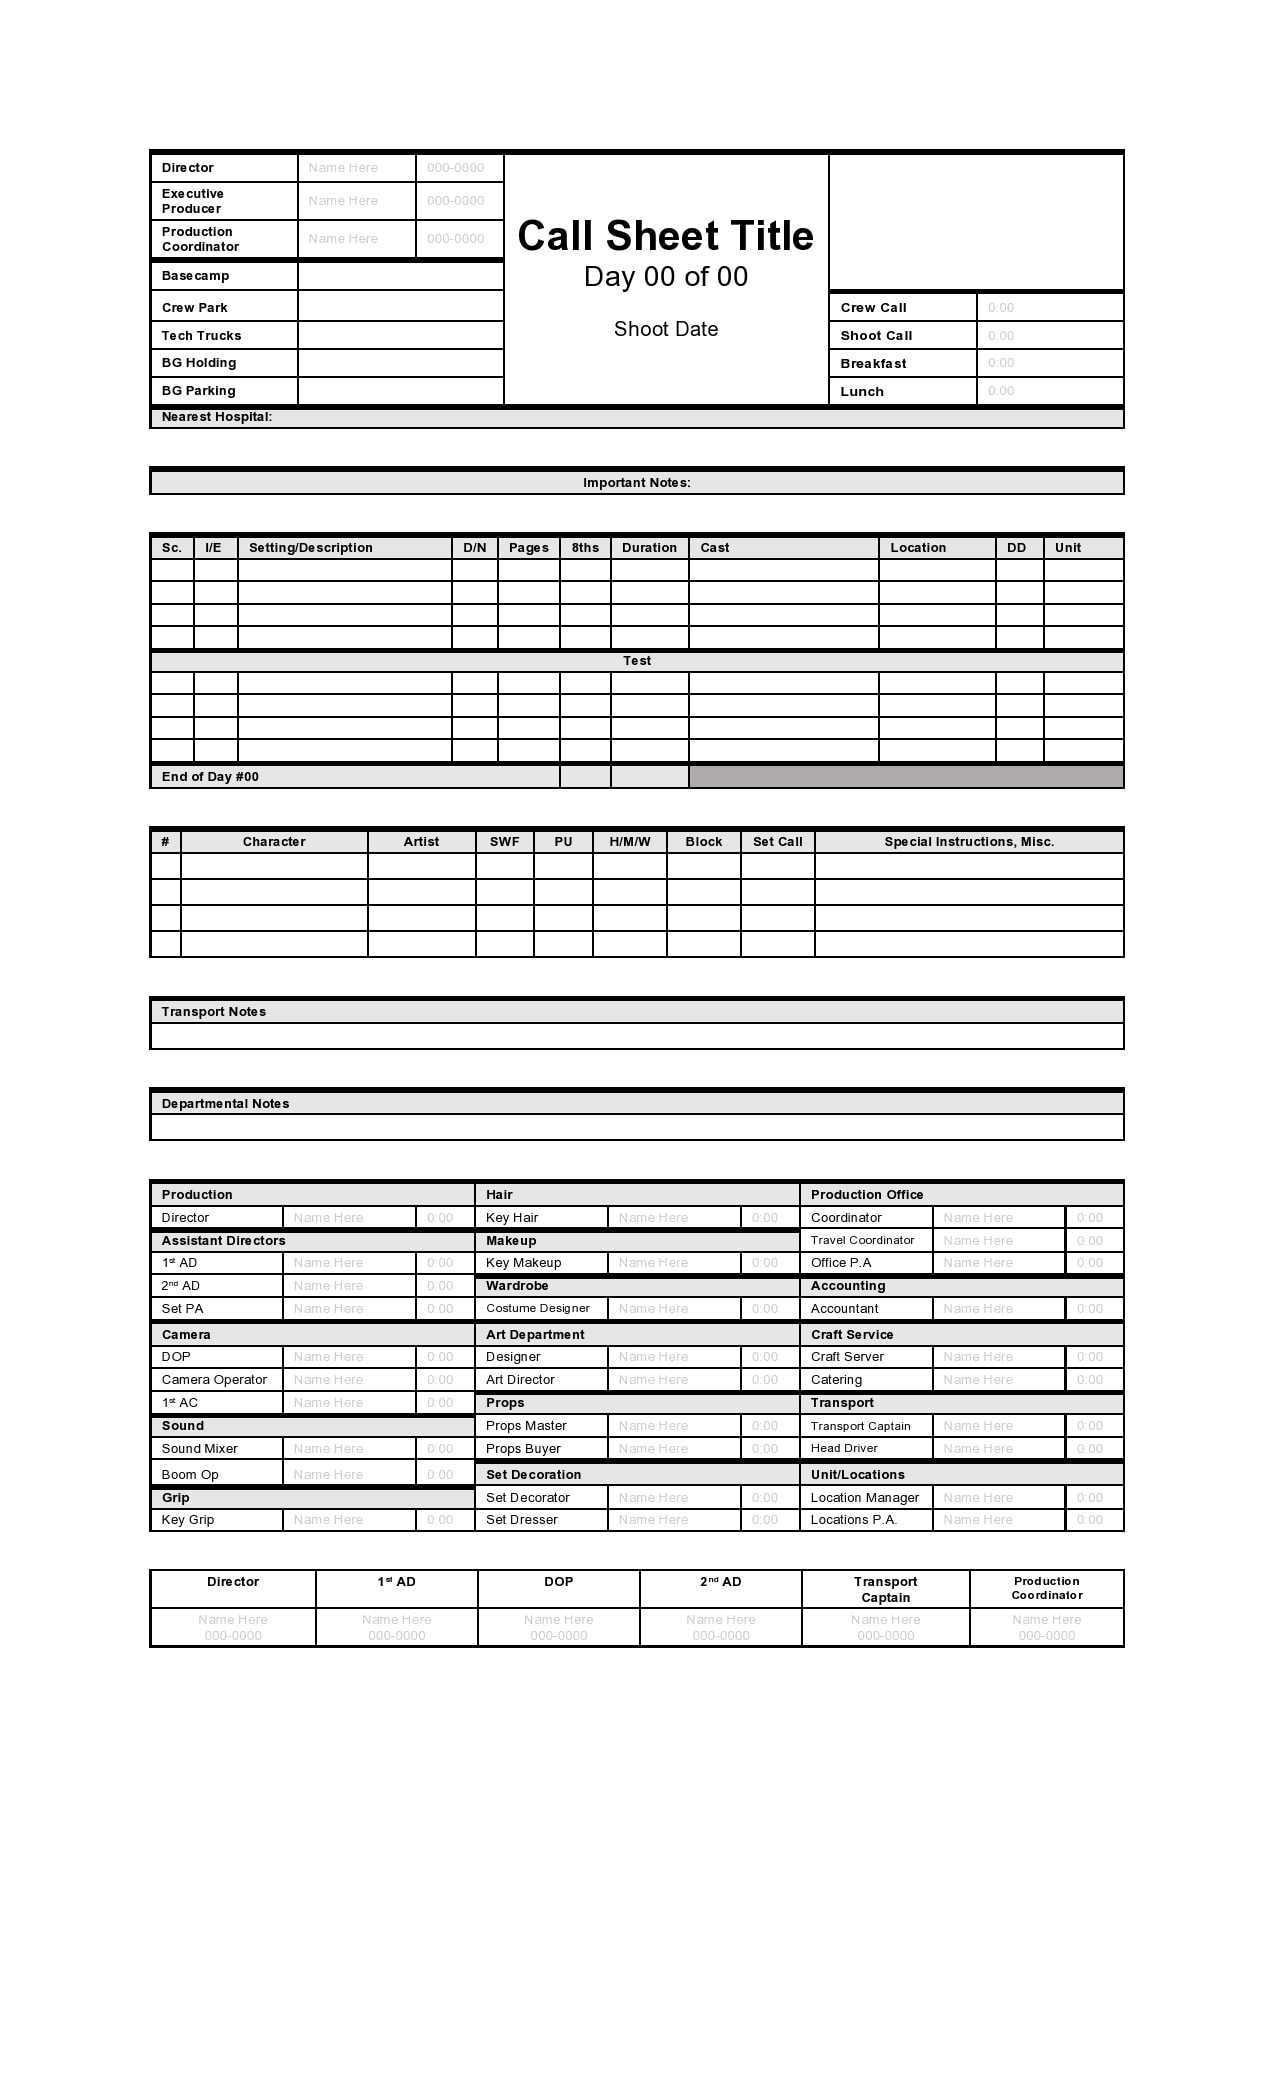 10 Simple Call Sheet Templates (FREE) - TemplateArchive Within Blank Call Sheet Template